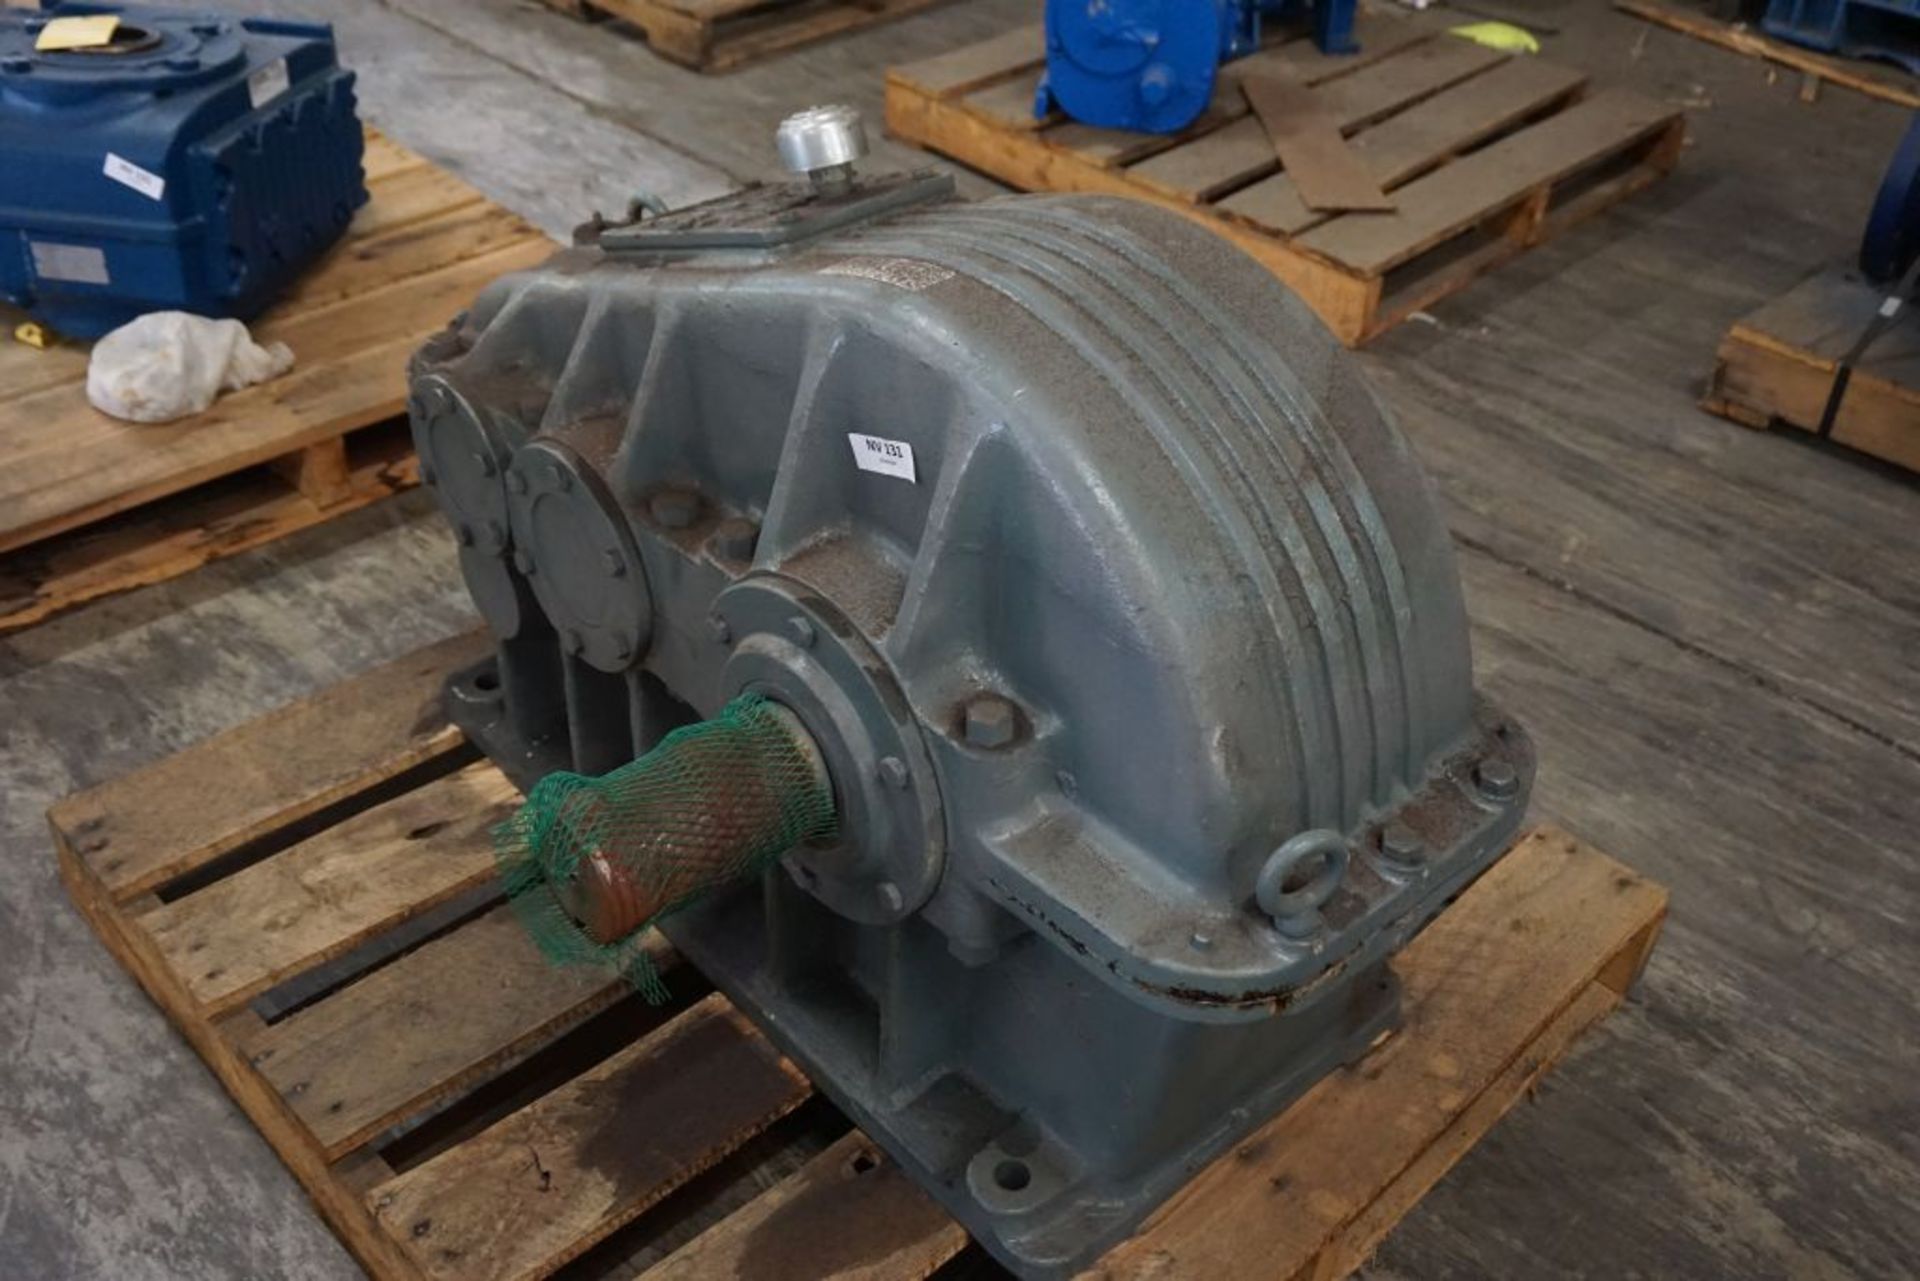 Foote Brothers Gearbox|Input: 1750 RPM; Output: 183.01; Ratio: 9.562|Lot Loading Fee: $5.00 - Image 3 of 6